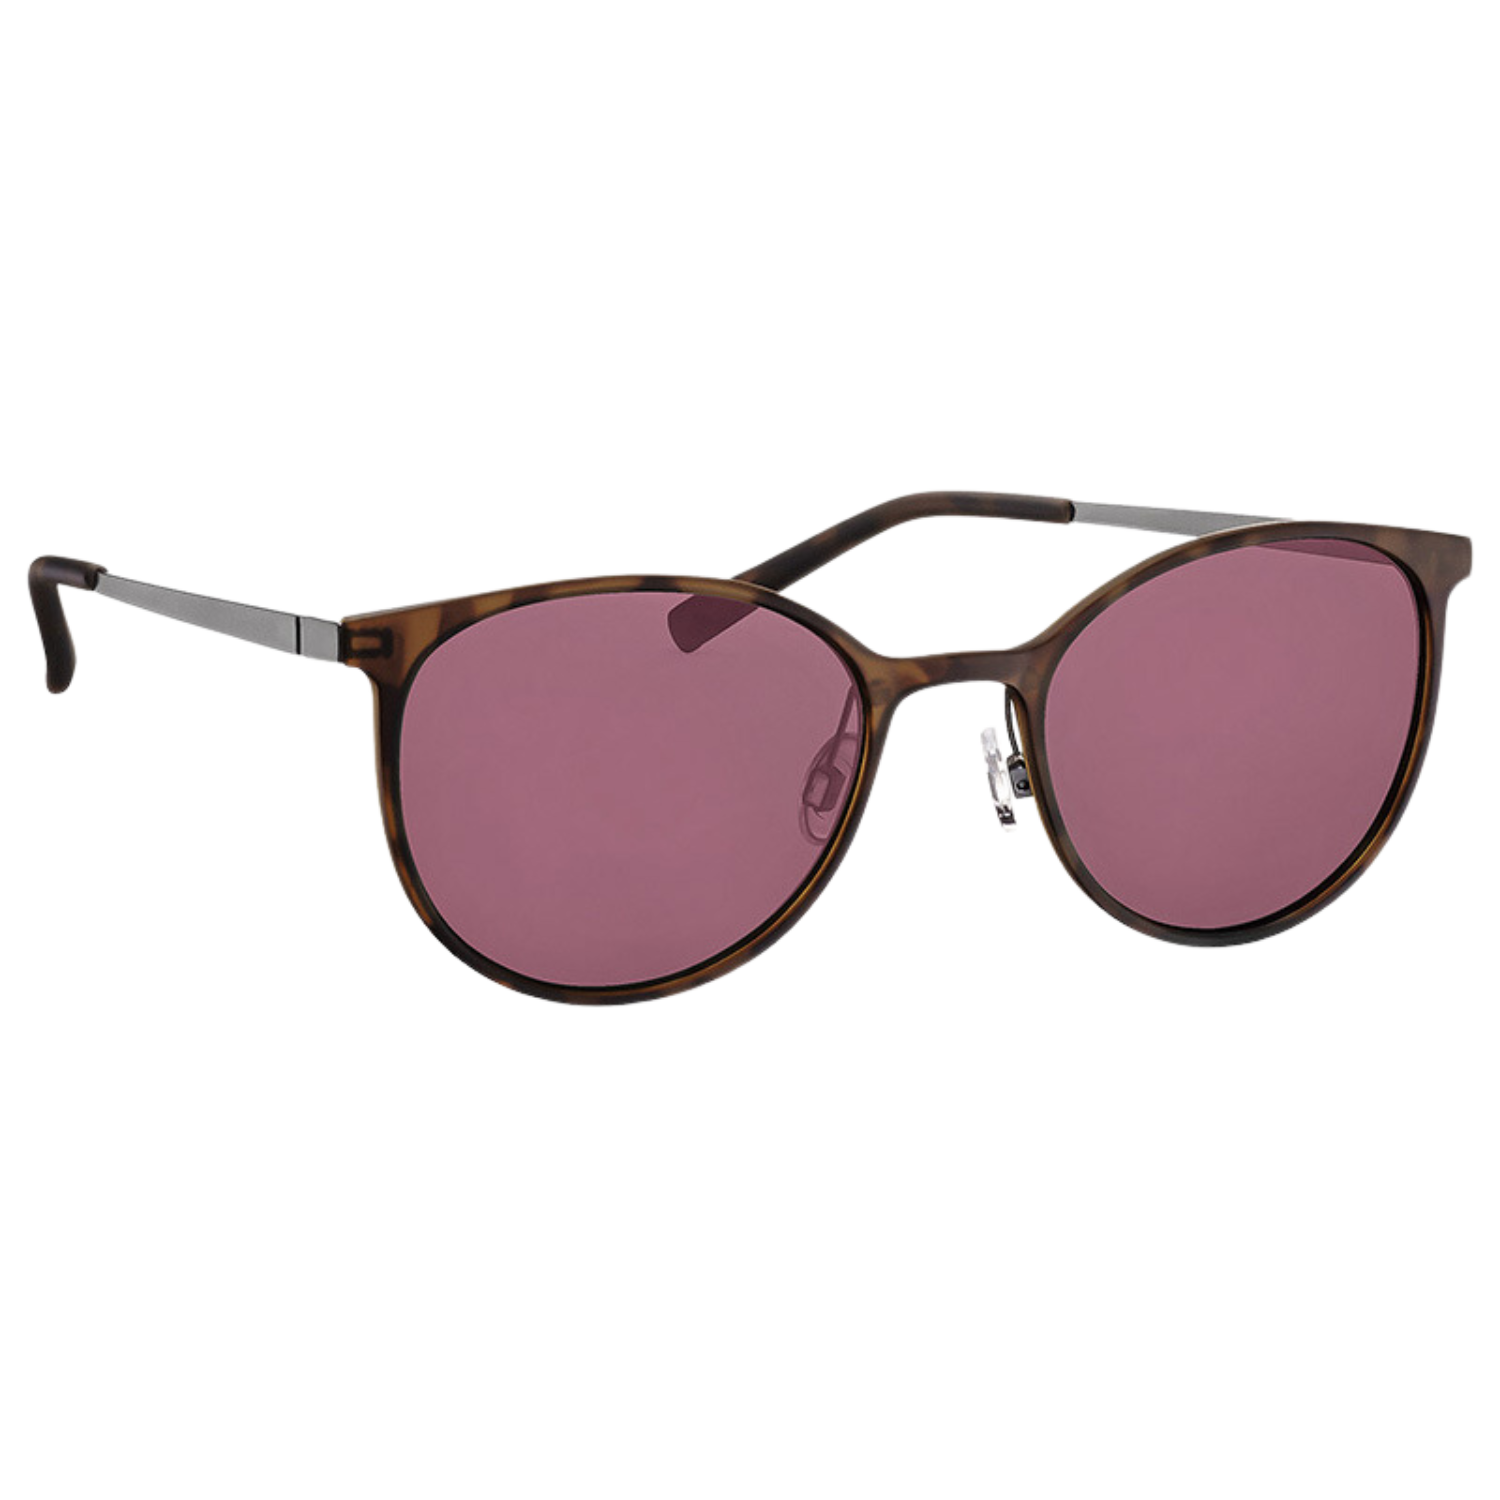 Image of the Acunis FL-41 Light Sensitivity Glasses with Brown Tortoise Acetate Frames and 75% tint lenses.